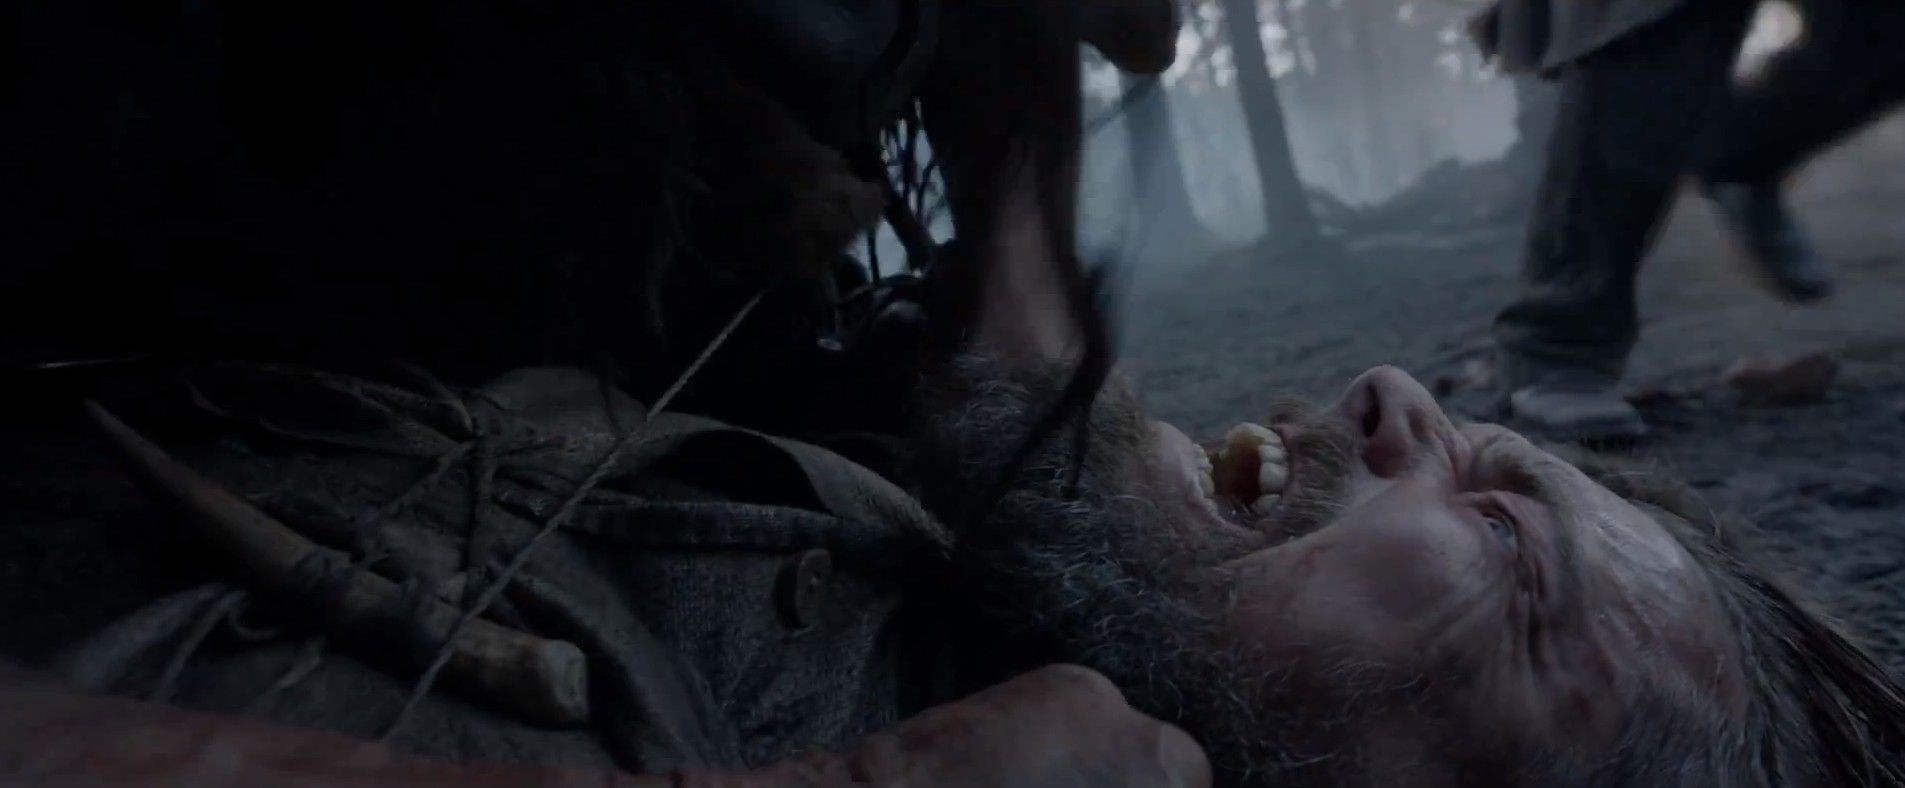 DiCaprio Fights in &#039;The Revenant&#039;